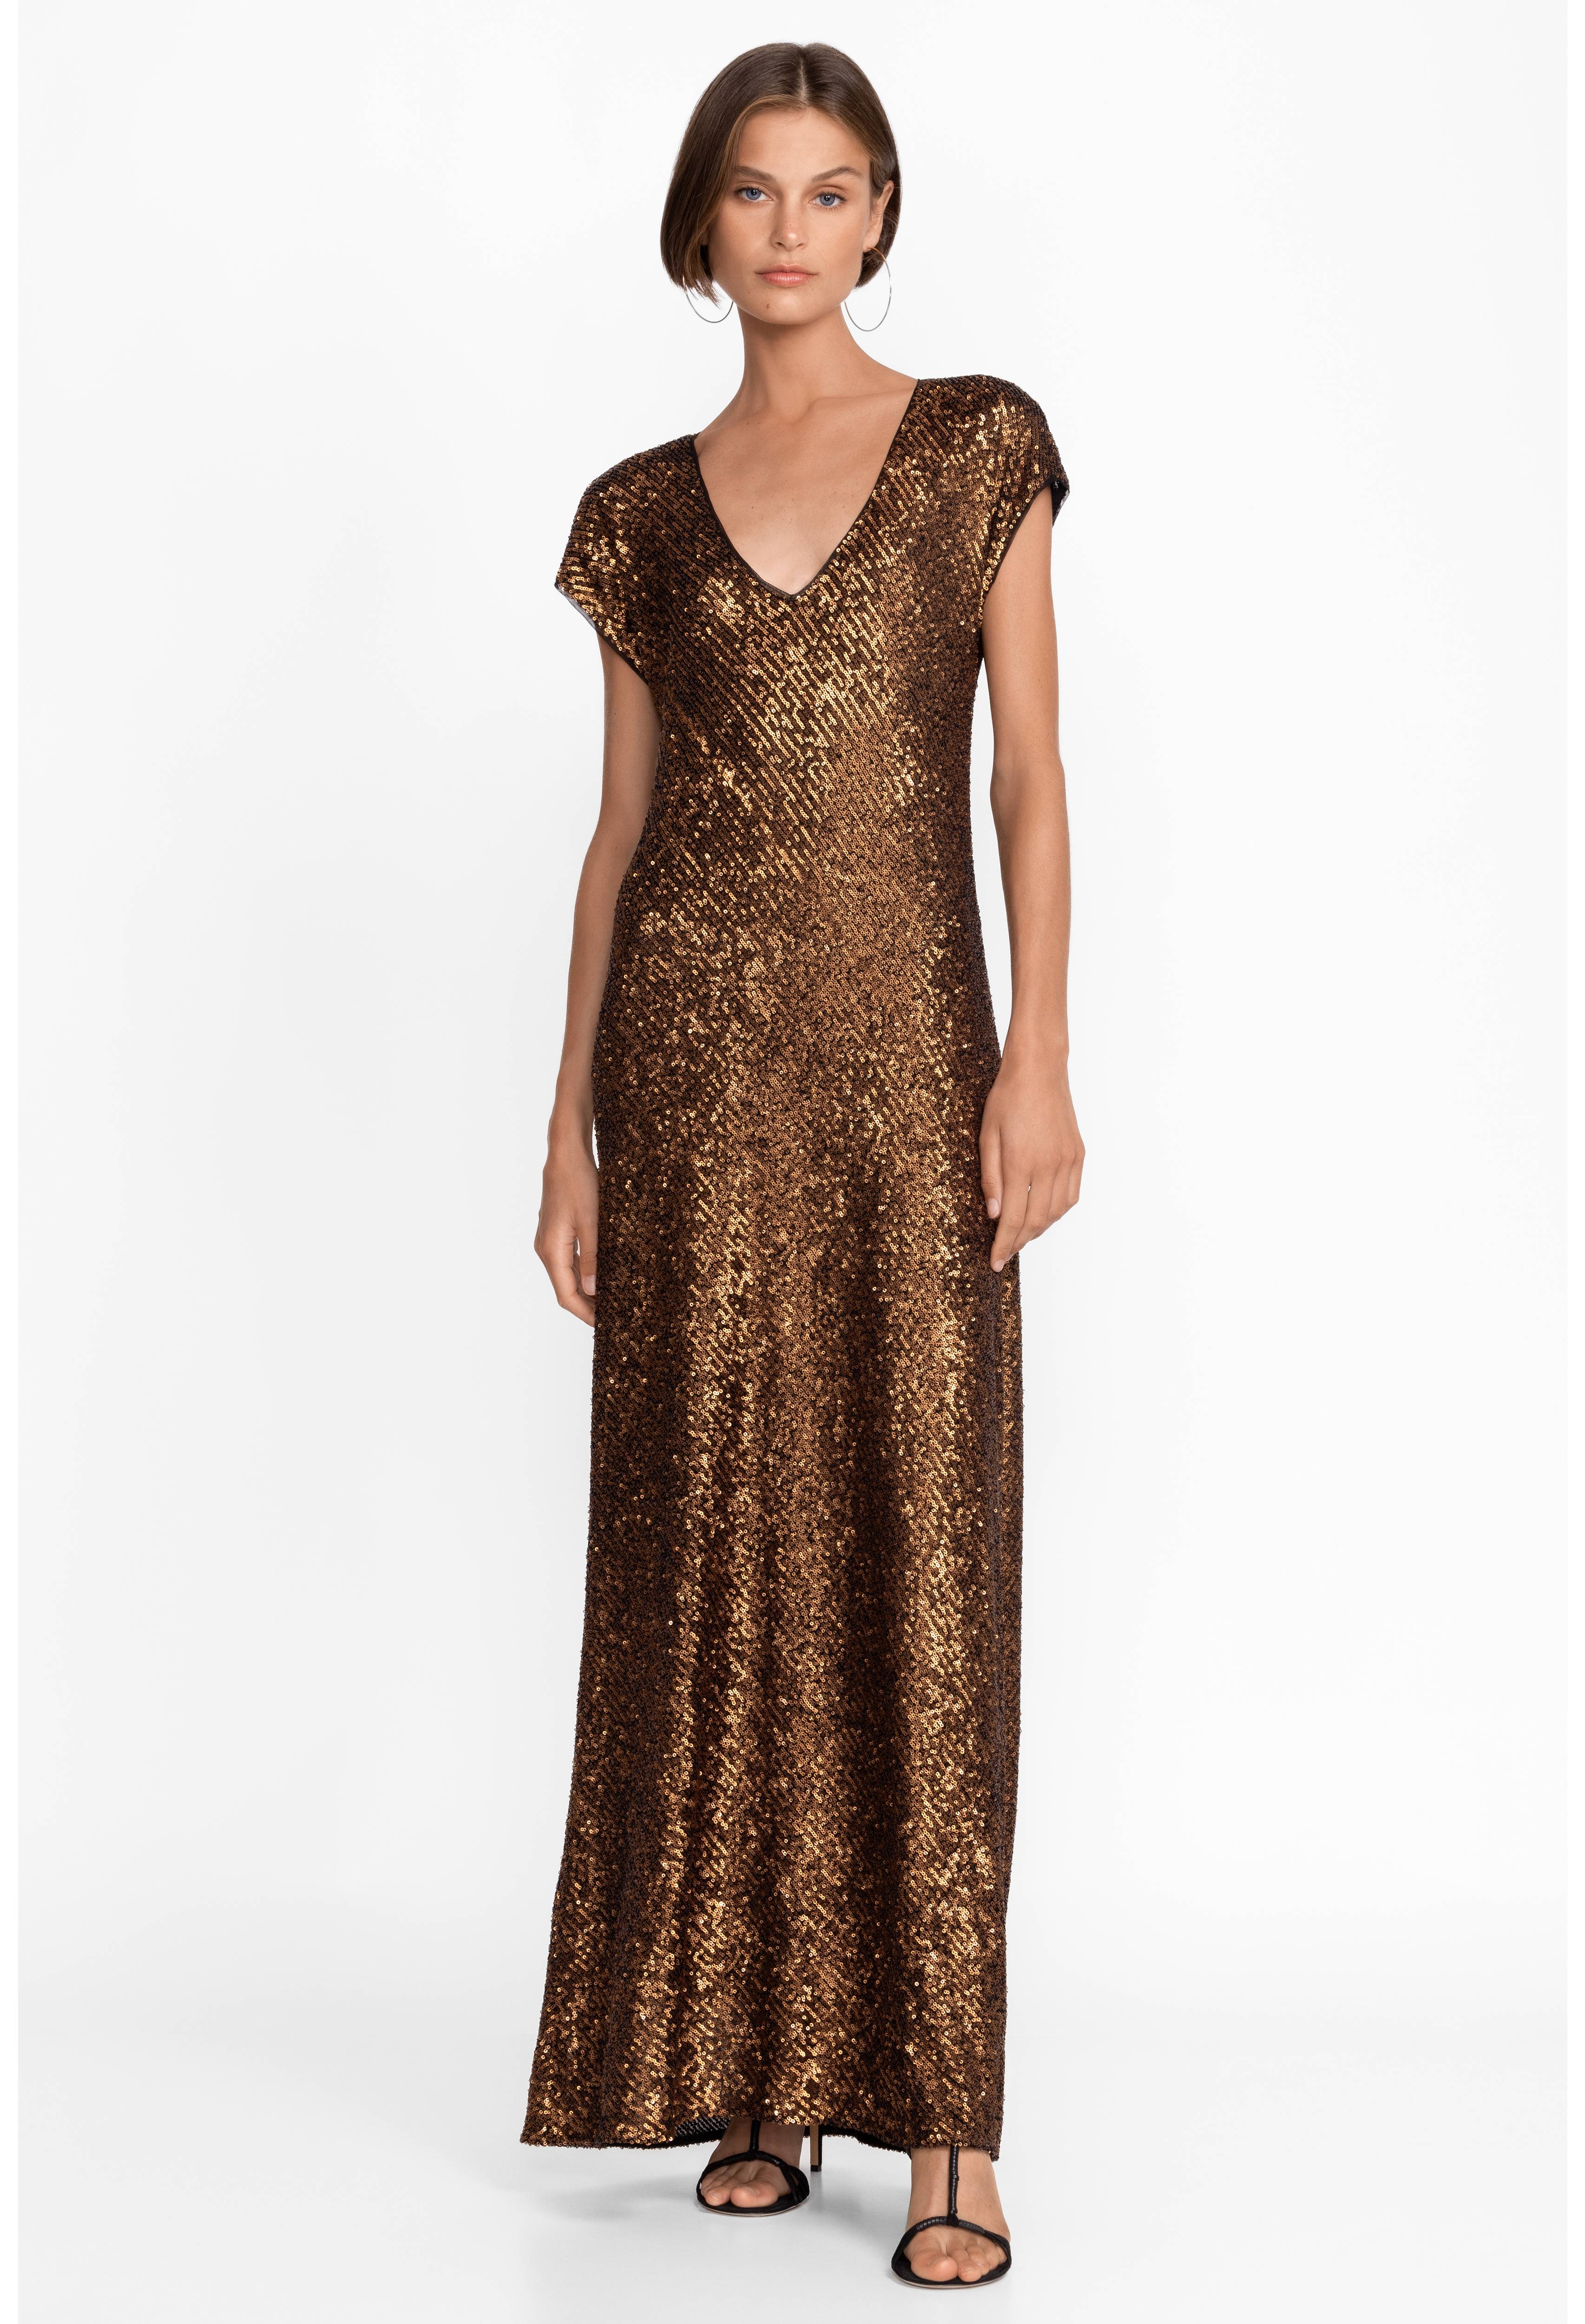 Toto Sequin Maxi Dress, , large image number 1